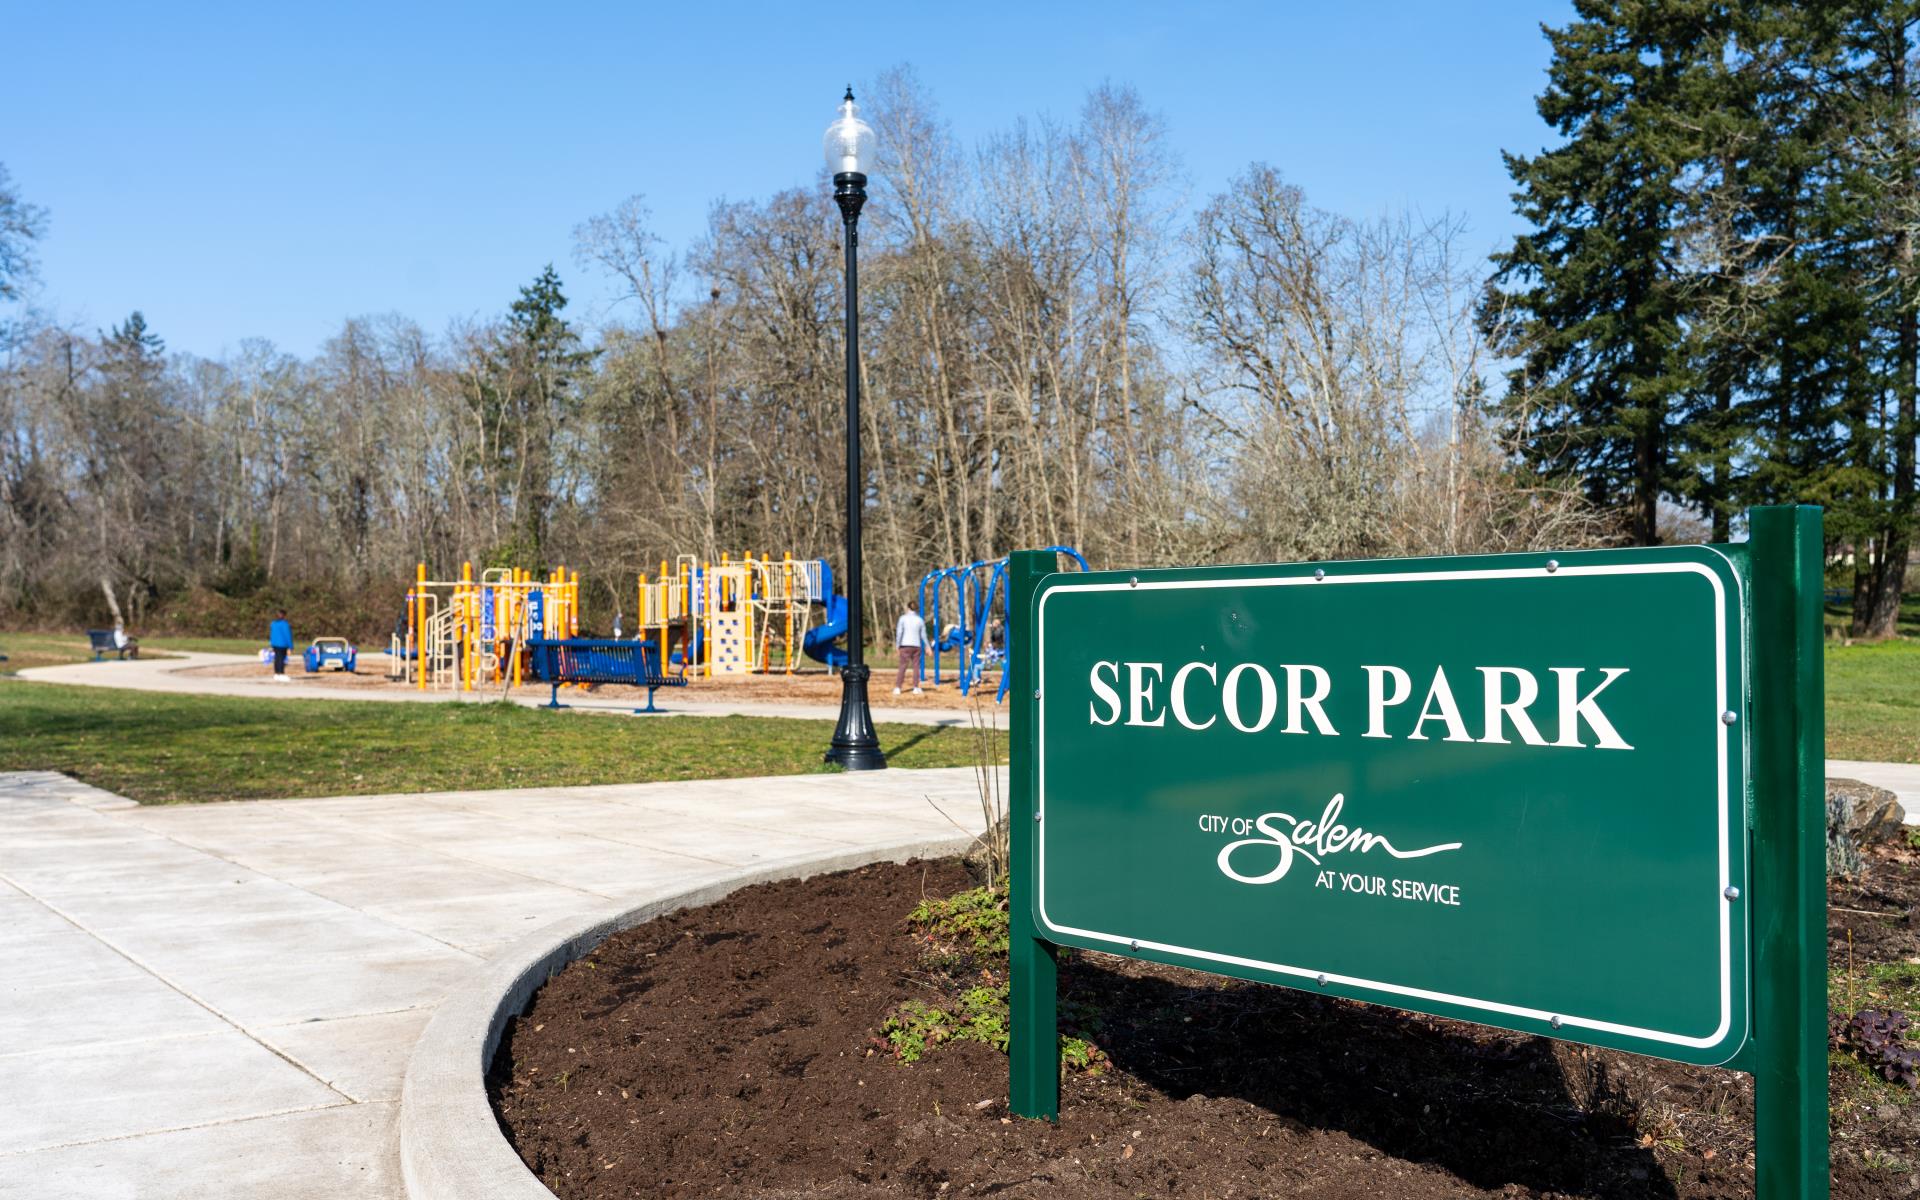 Secor Park Sign and playground